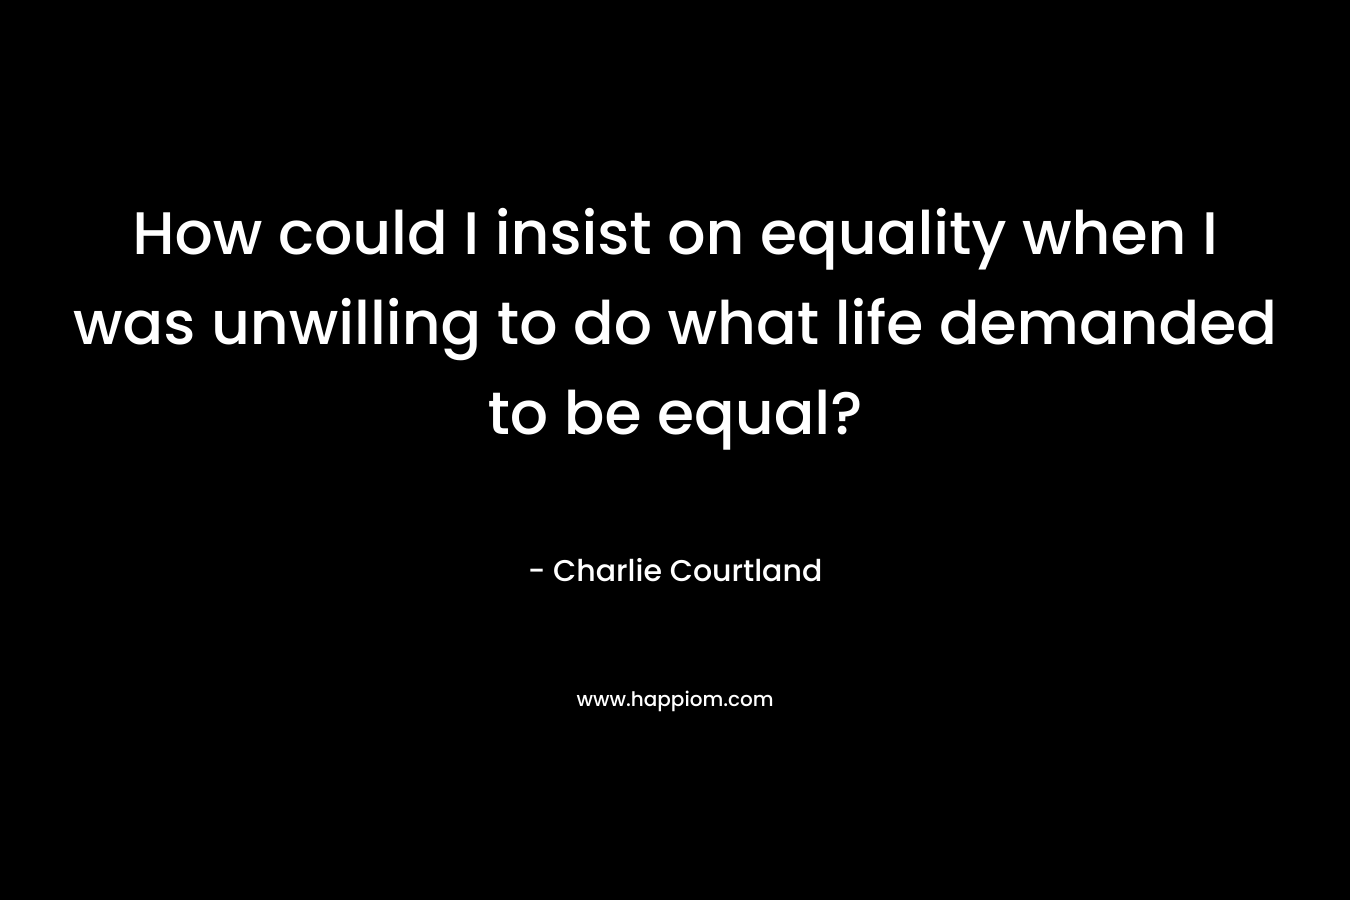 How could I insist on equality when I was unwilling to do what life demanded to be equal? – Charlie Courtland